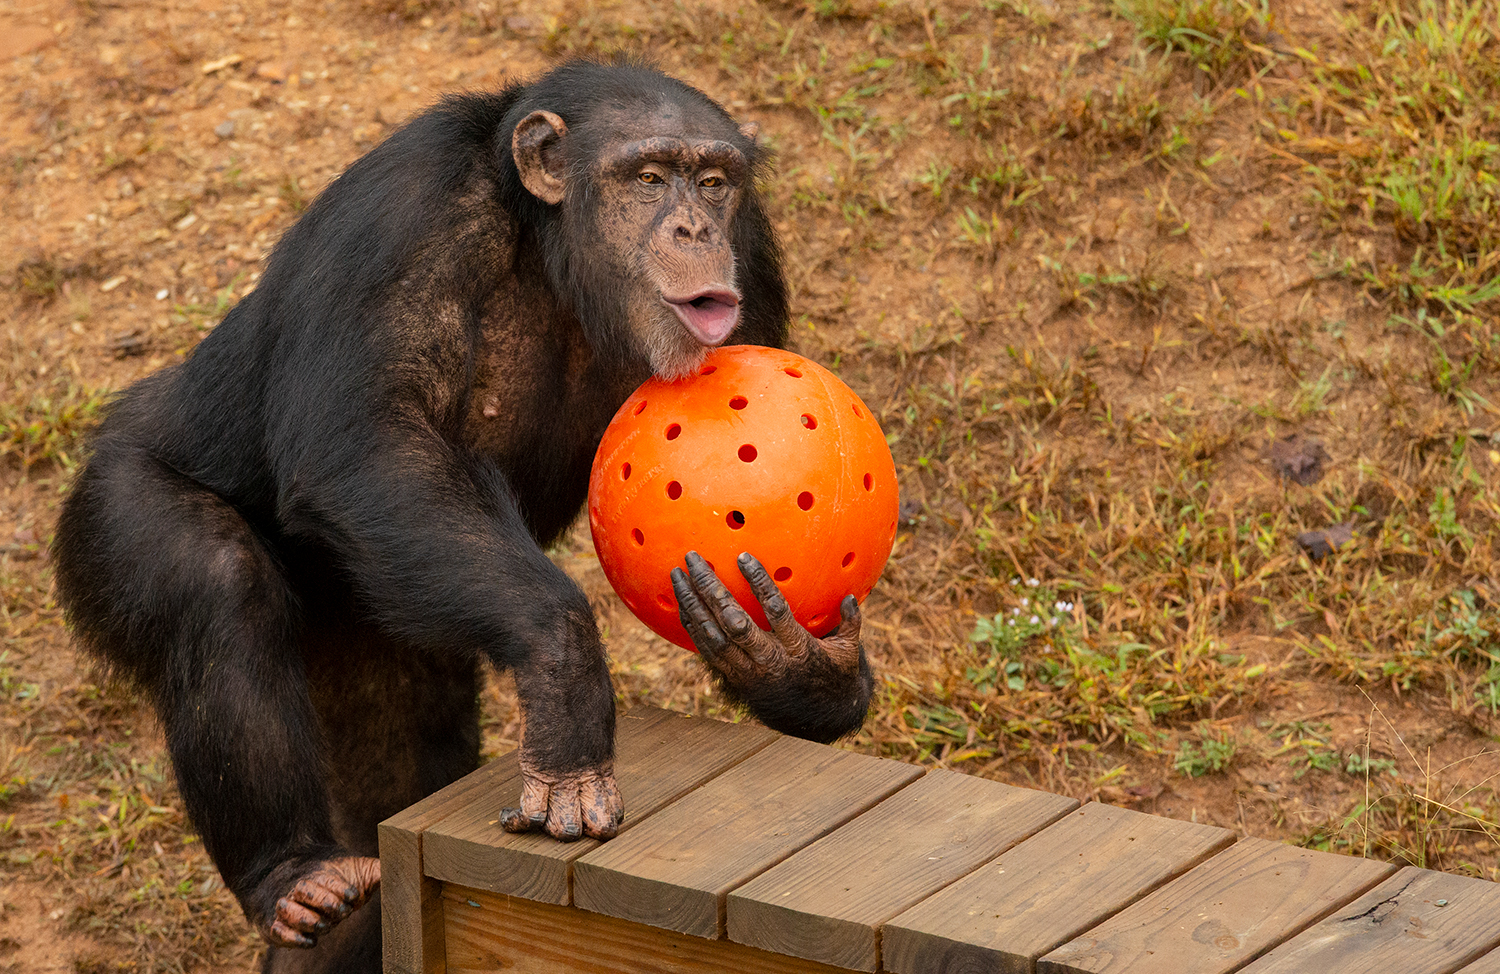 Chimpanzee Noel carrying an orange ball in the forest